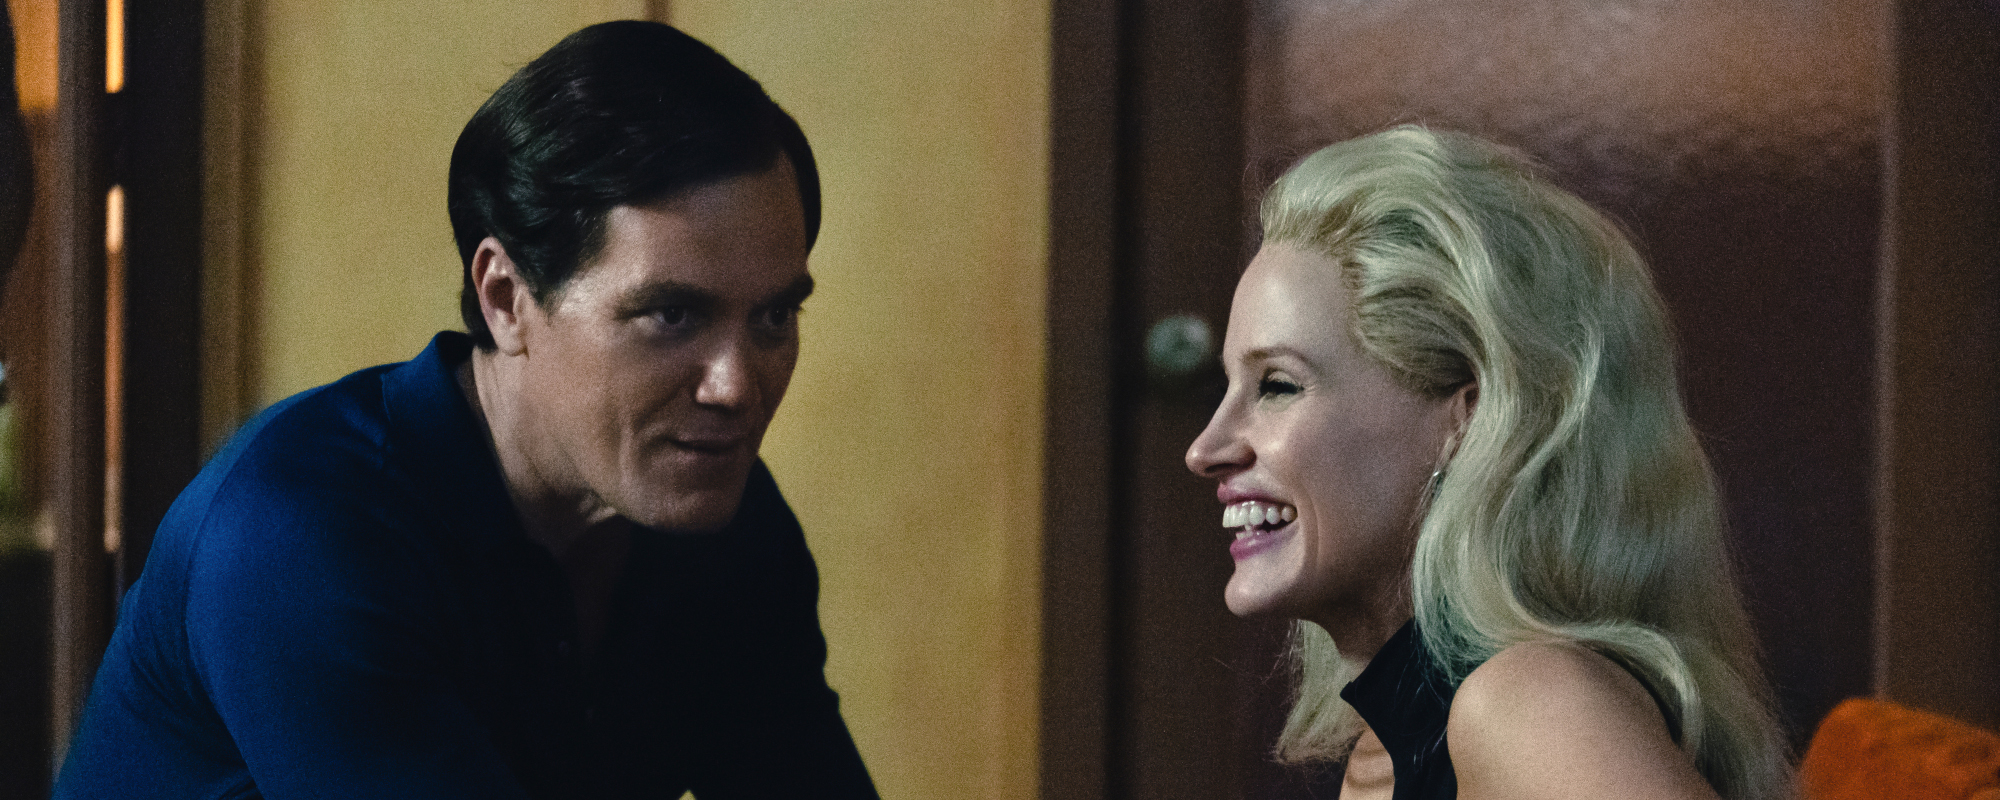 Jessica Chastain and Michael Shannon on Prepping for Tammy Wynette and George Jones Roles in New Series, ‘George & Tammy”